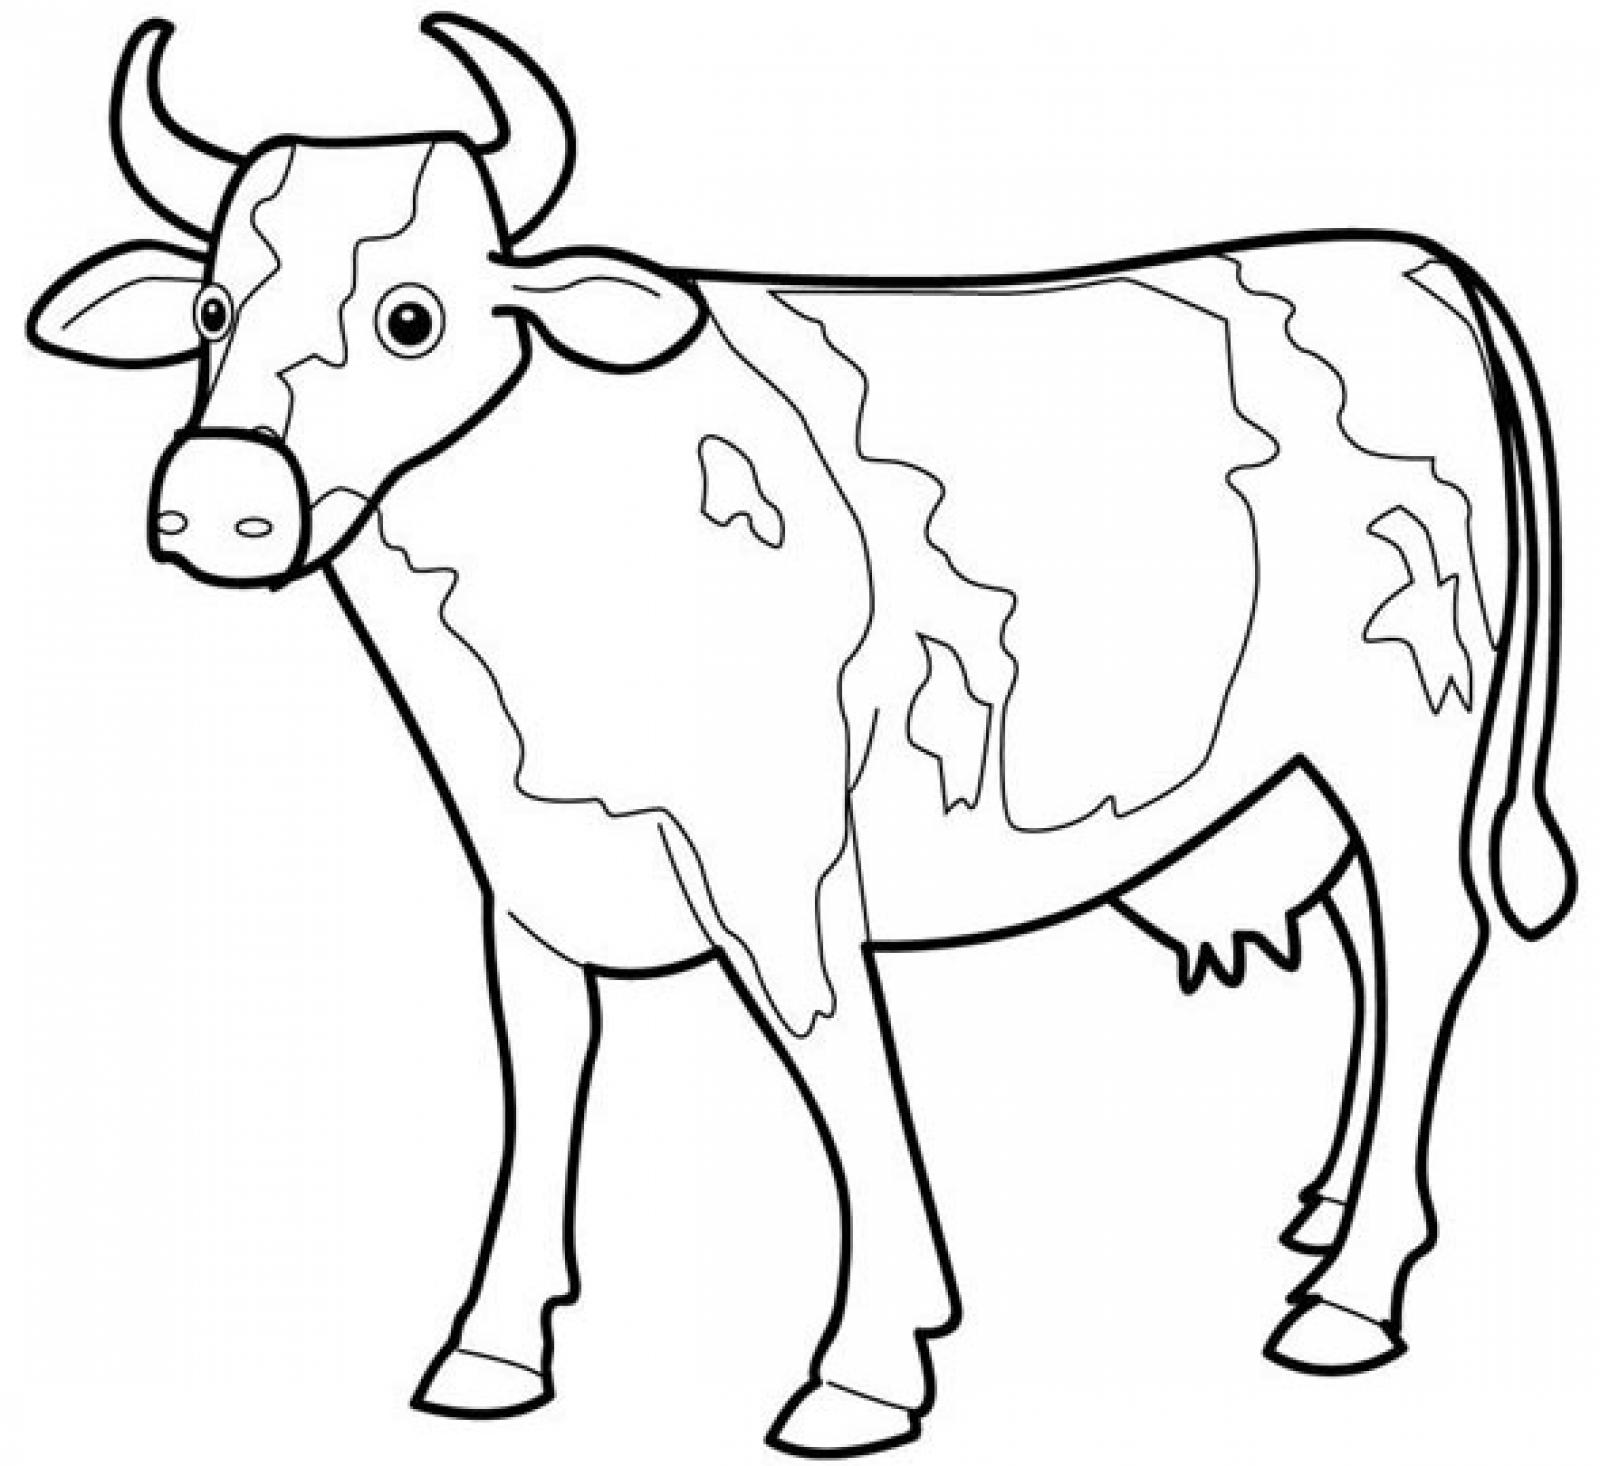 Cow Coloring Page - Dr. Odd